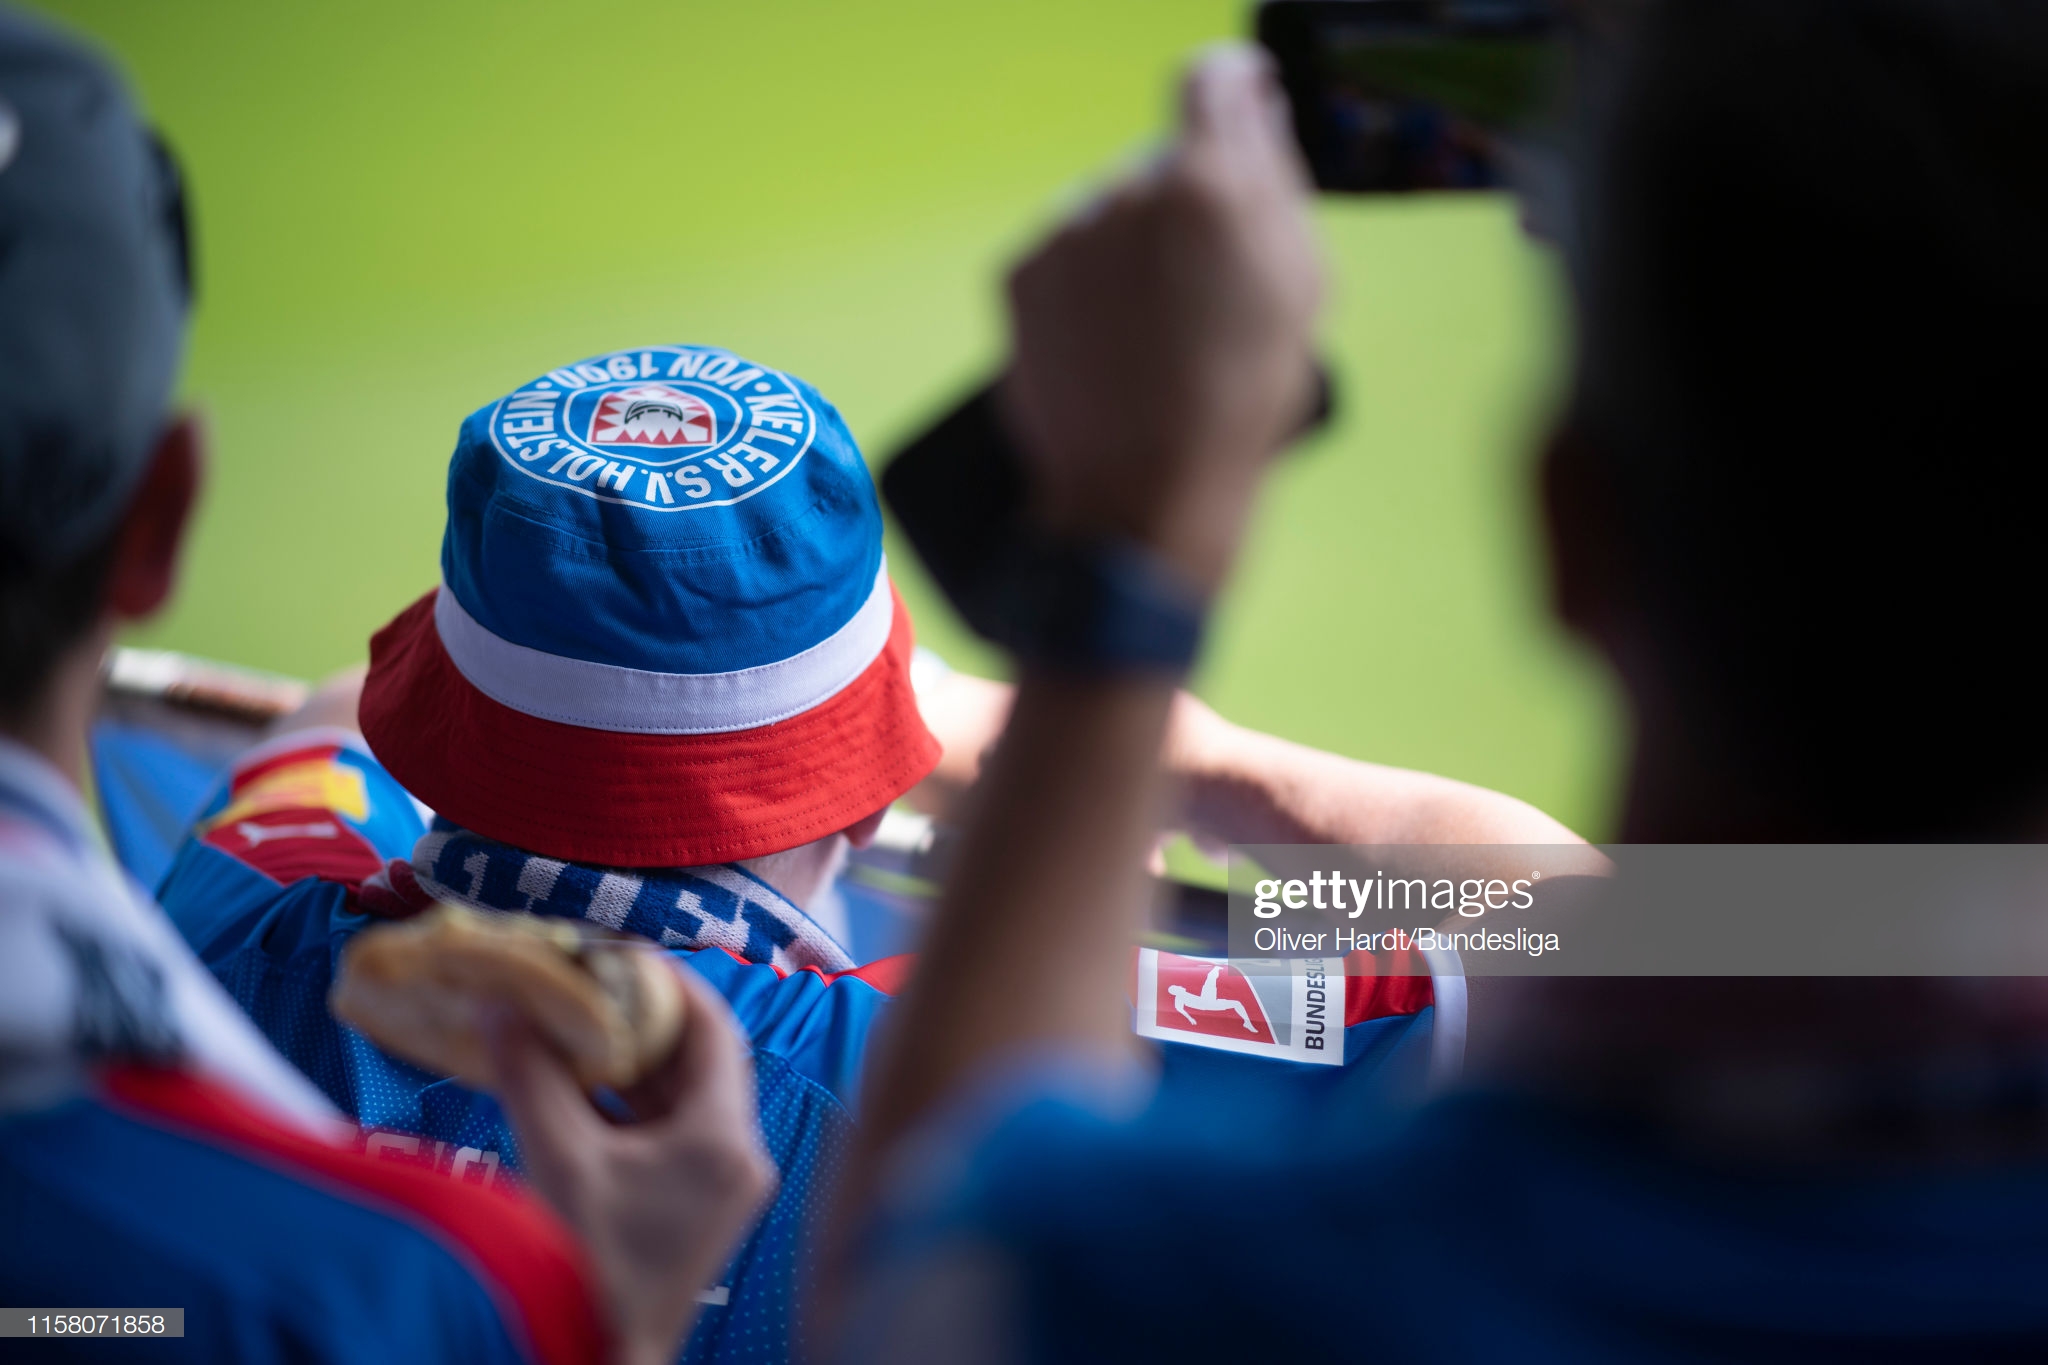 gettyimages-1158071858-2048x2048.jpg